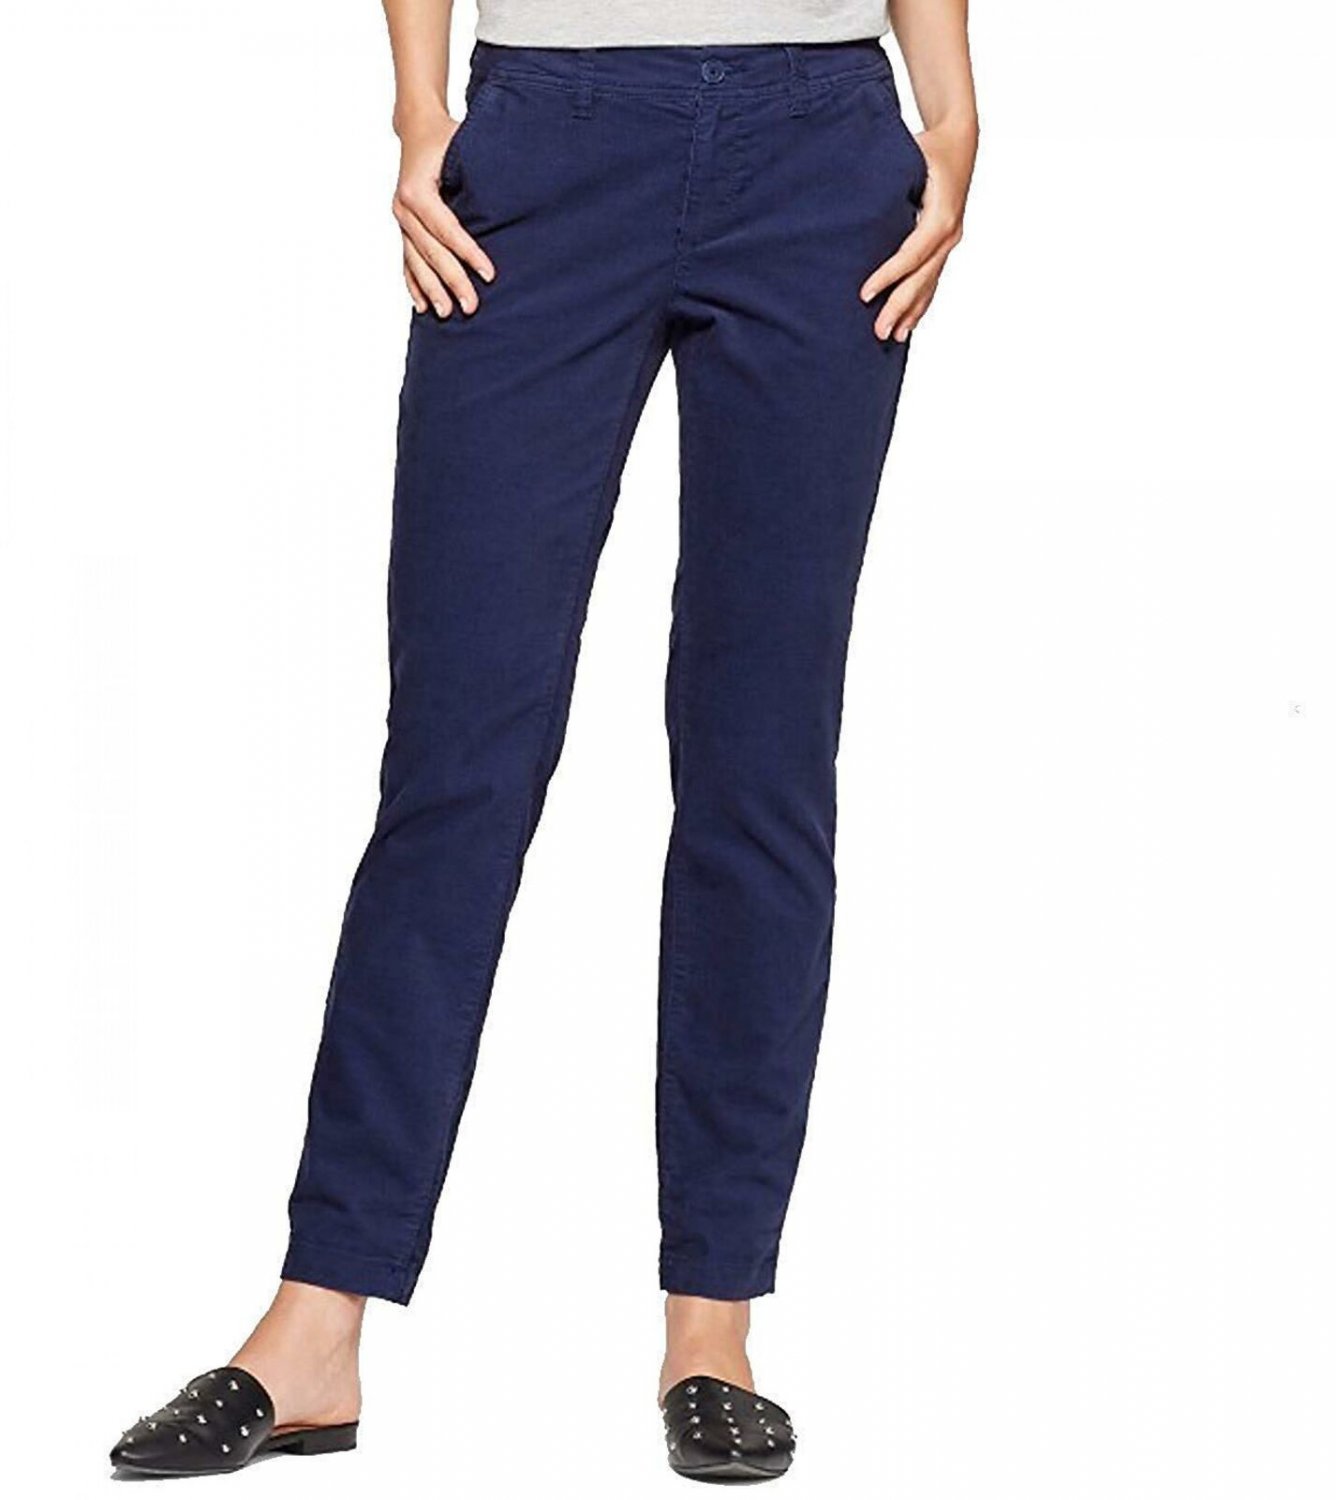 A New Day Women's Stretch Mid Rise Slim Corduroy Pants 6 Navy Blue